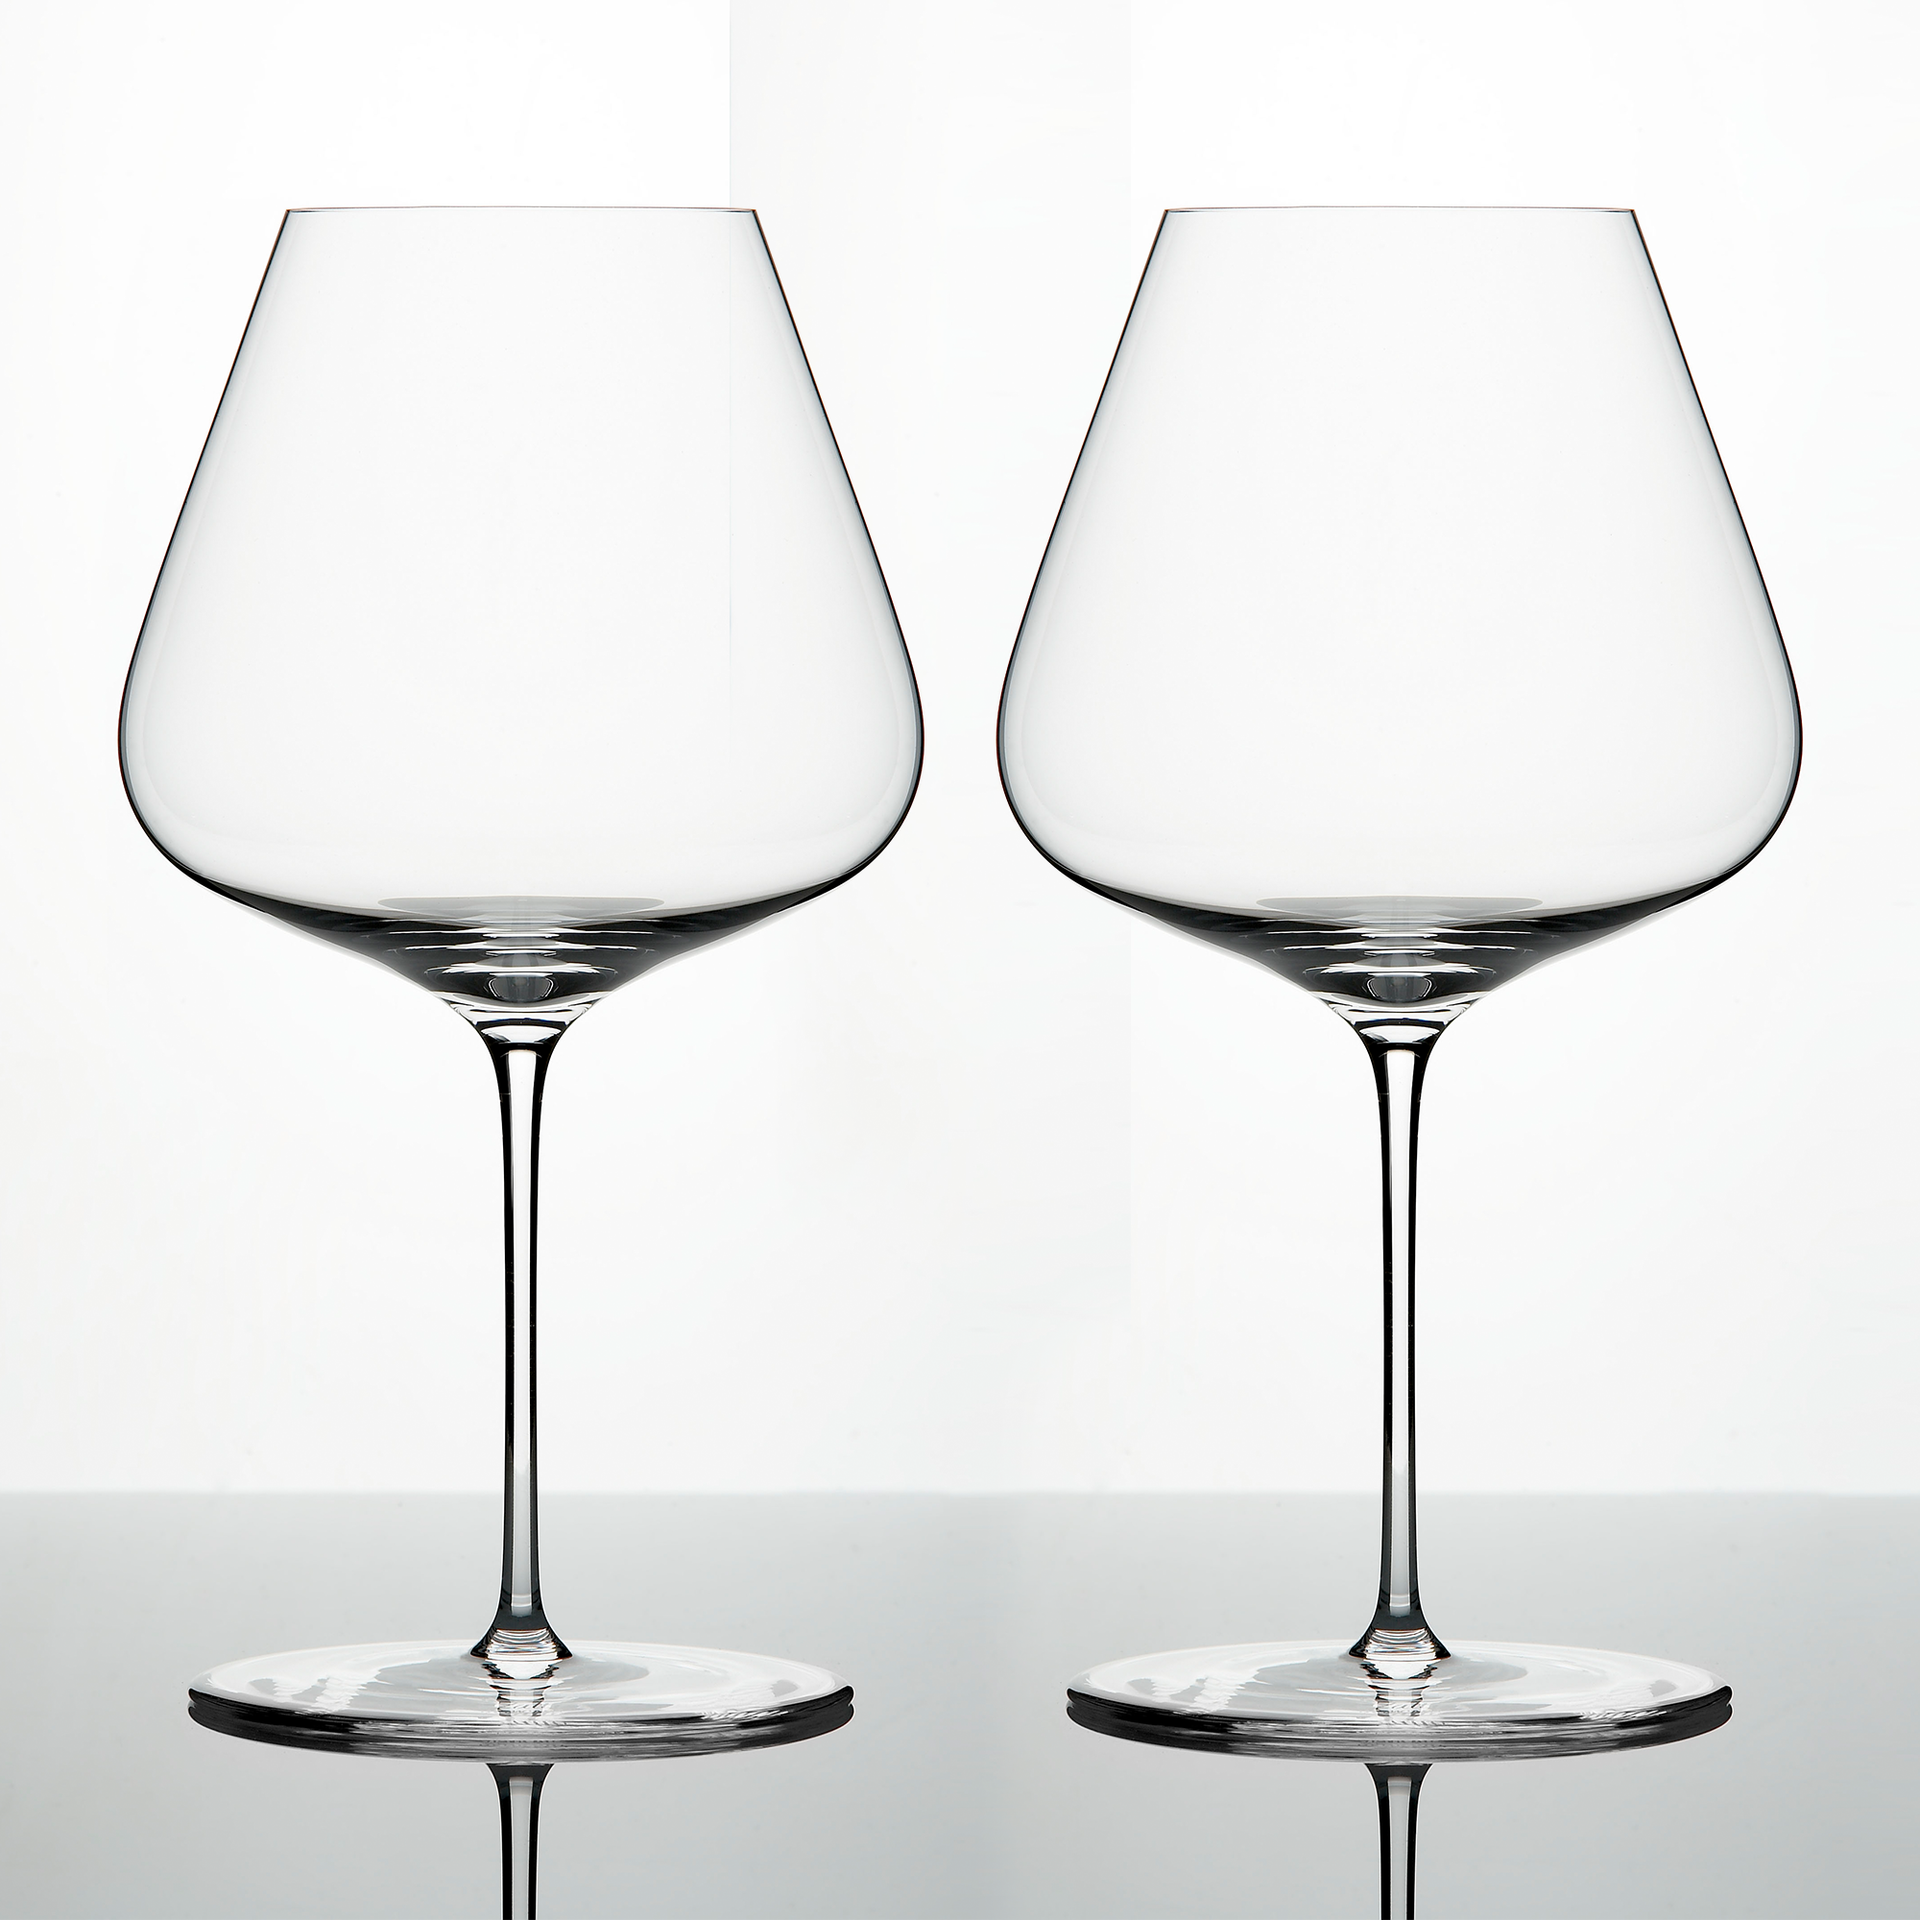 Zalto Universal Denk'art Wine Glasses 2 Pack DISPLAYED ONLY NEVER